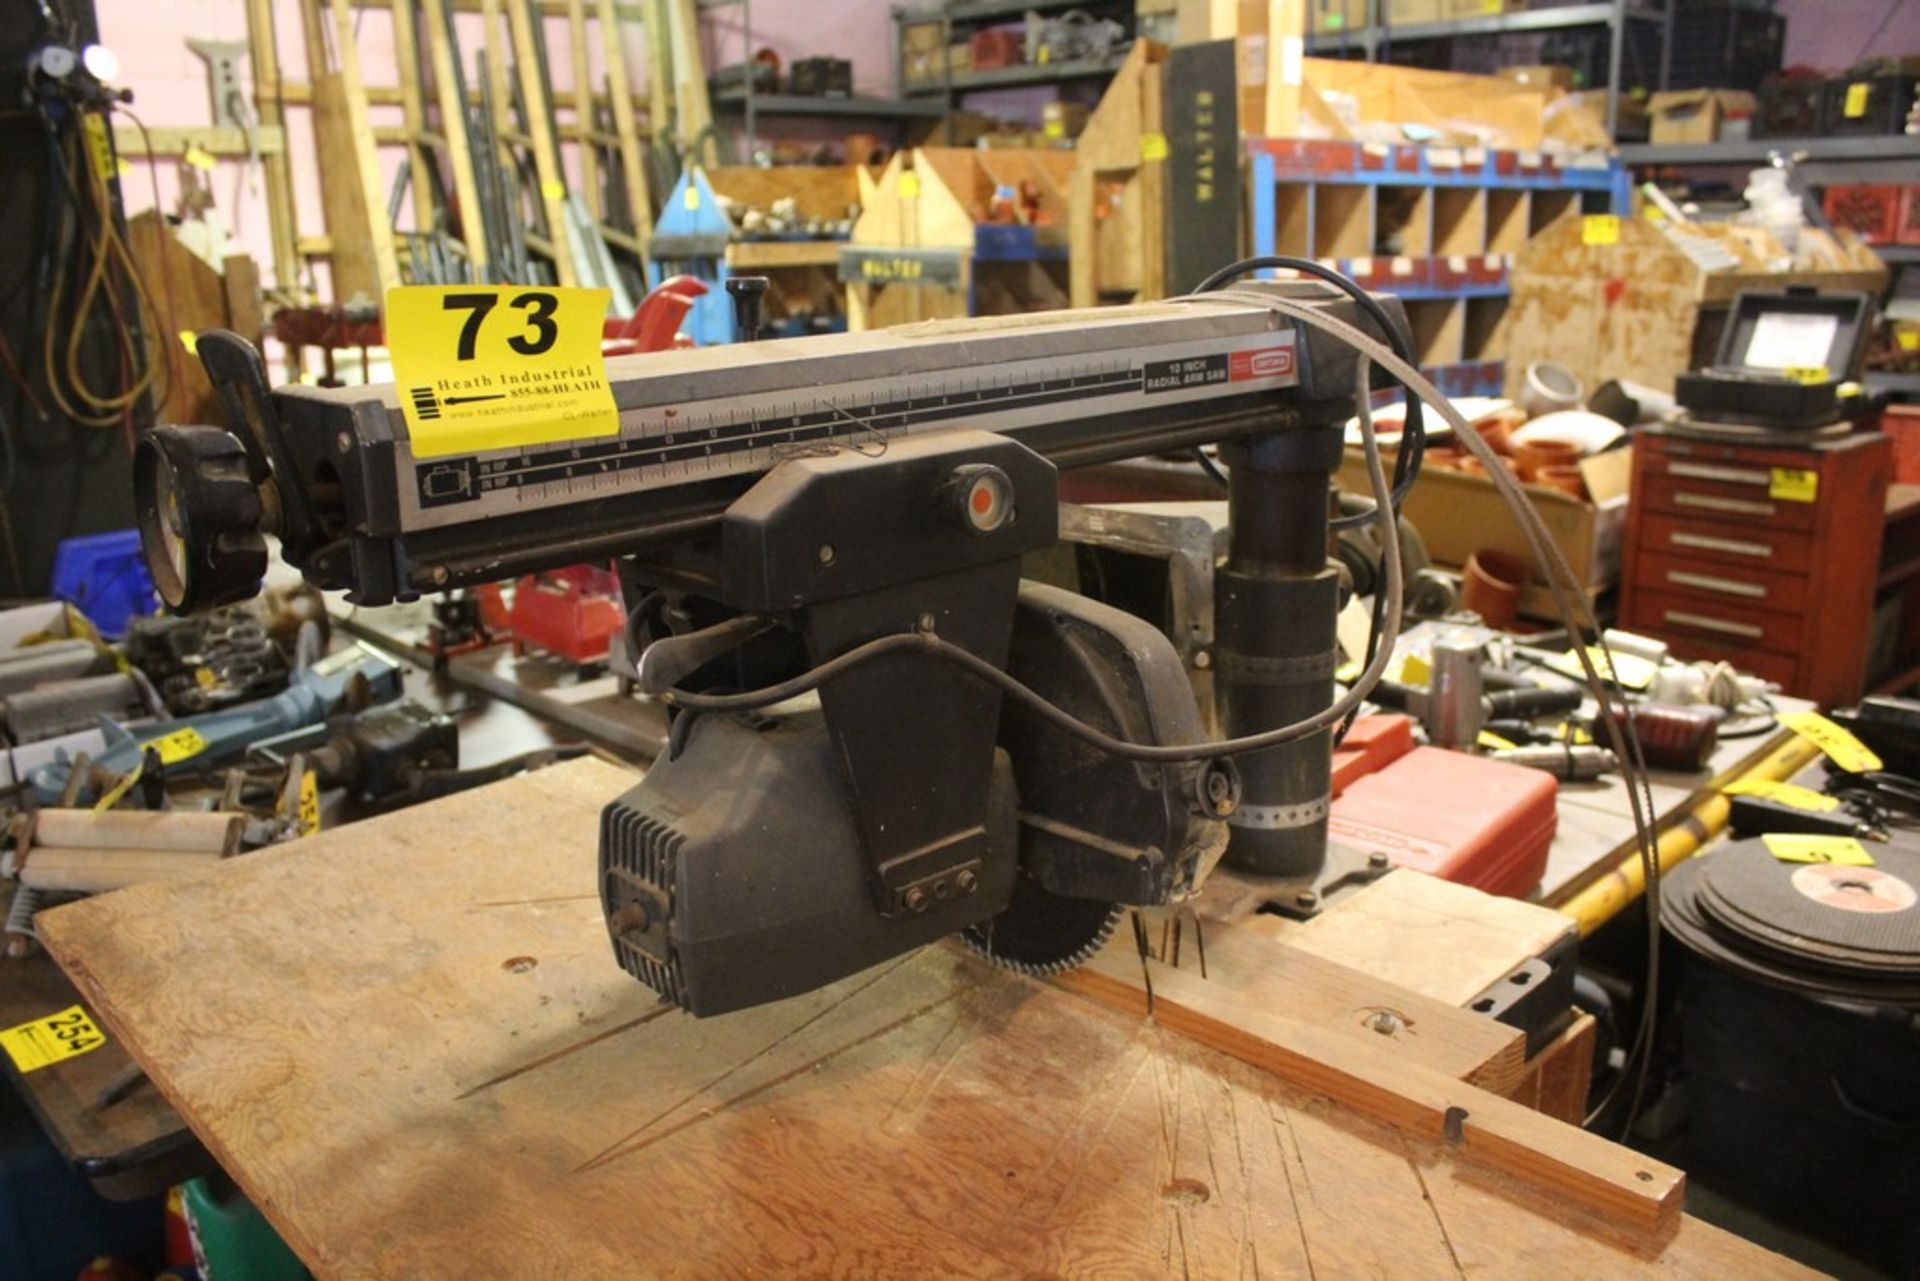 CRAFTSMAN 12" RADIAL ARM SAW WITH WOOD CABINET BASE - Image 3 of 3